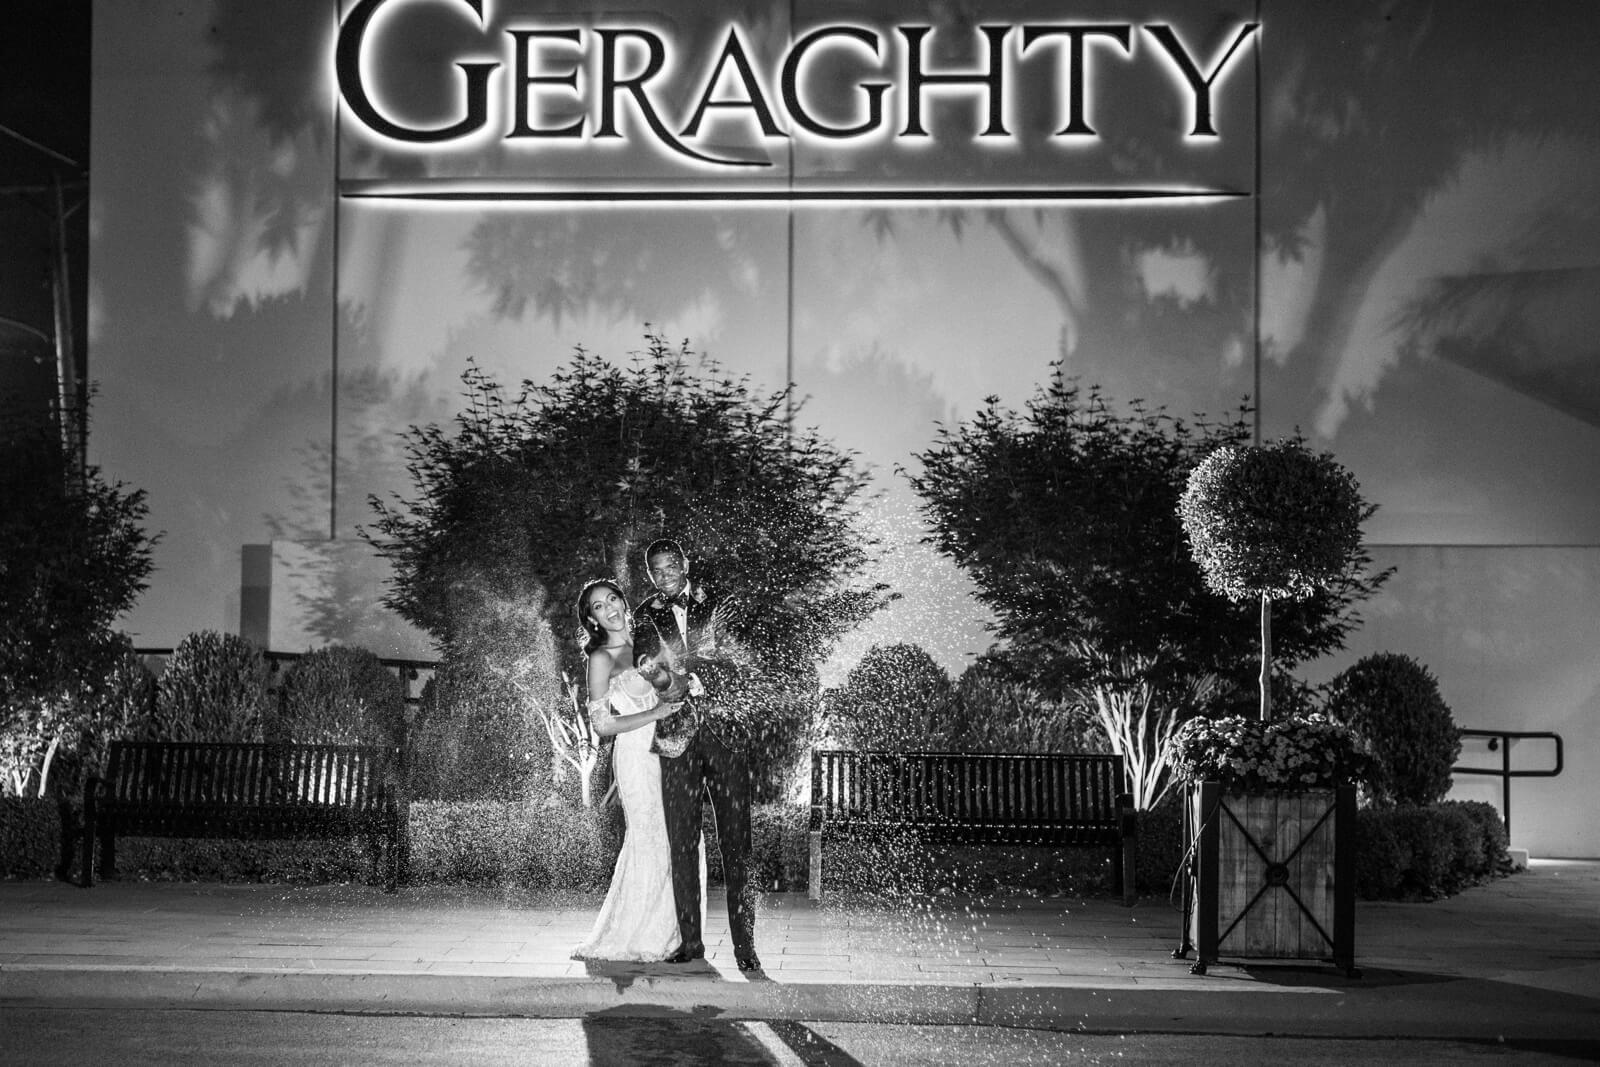 Wedding at The Geraghty Chicago